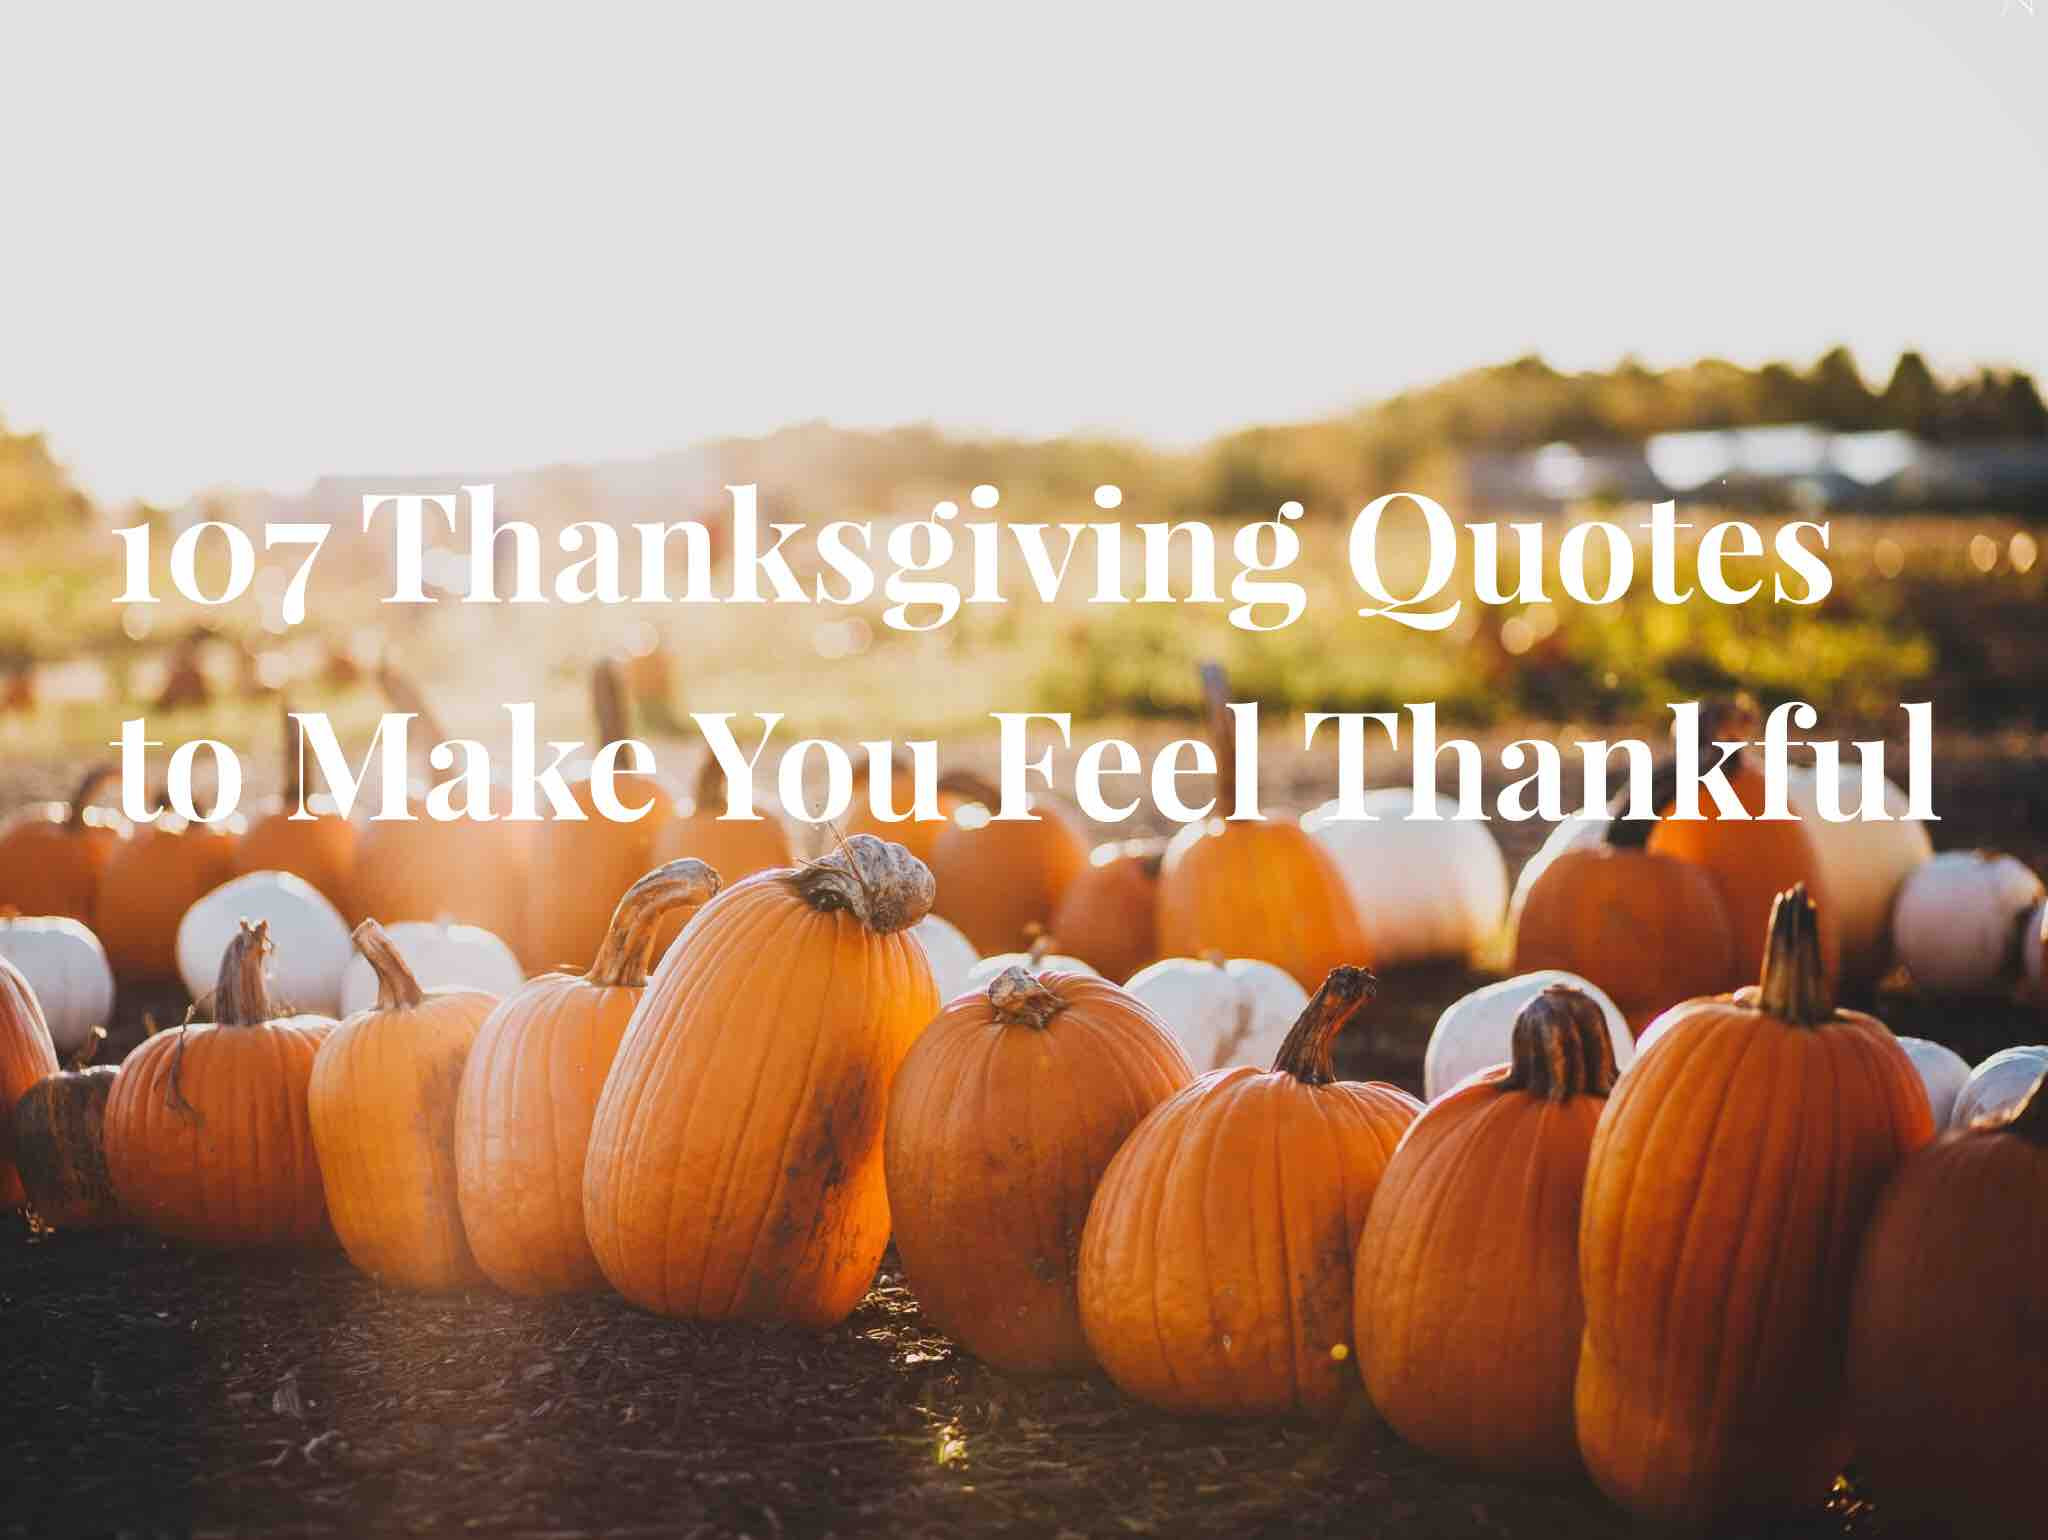 Thanksgiving Images And Quotes
 107 Thanksgiving Quotes to Make You Feel Thankful